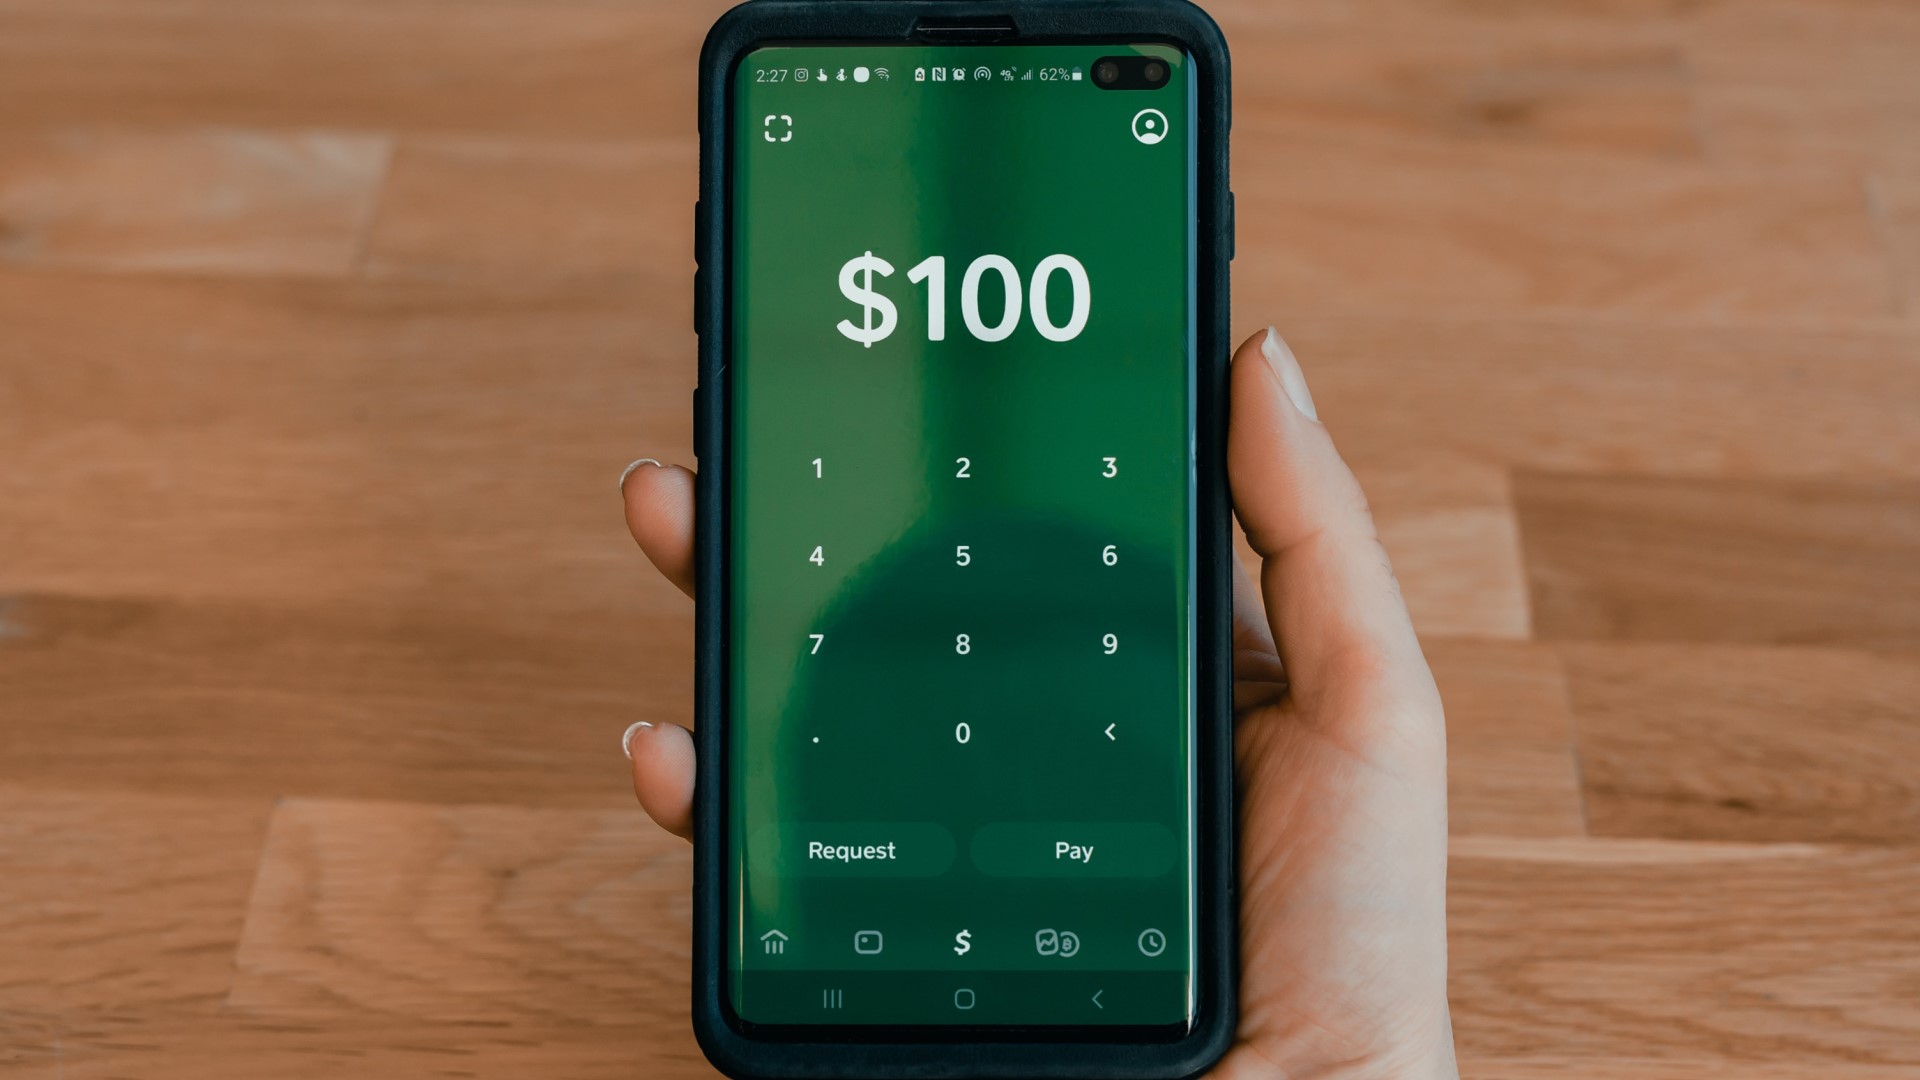 Red Flags of Fake Cash App Giveaway Scams & How to Beat It